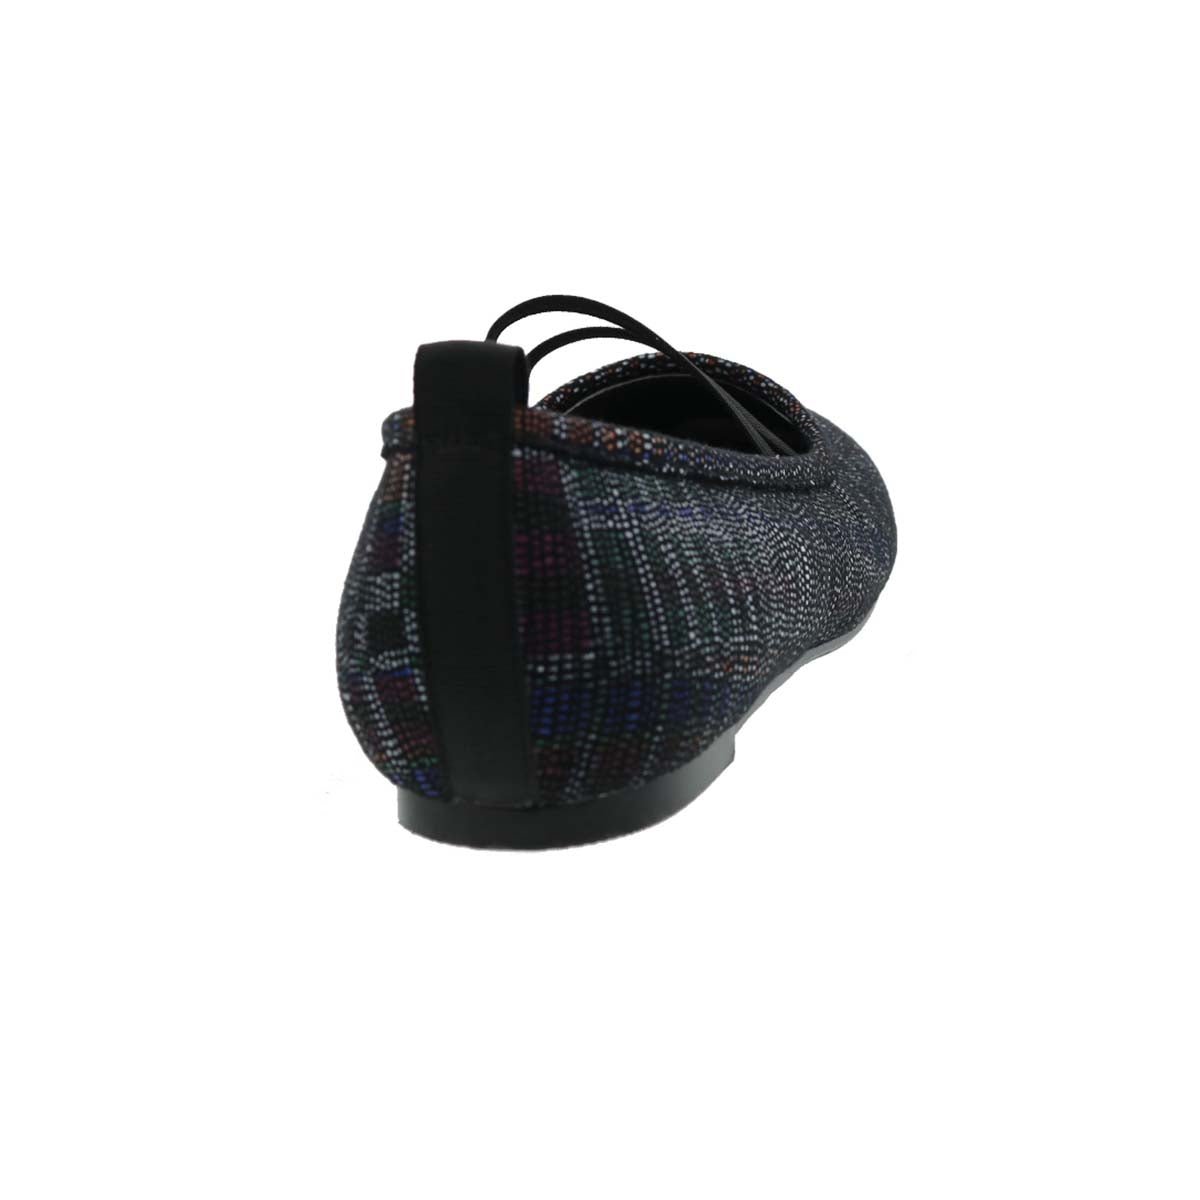 BELLINI SISSY WOMEN SLIP-ON MARY JANE SHOES IN BLACK MULTI TEXTILE - TLW Shoes